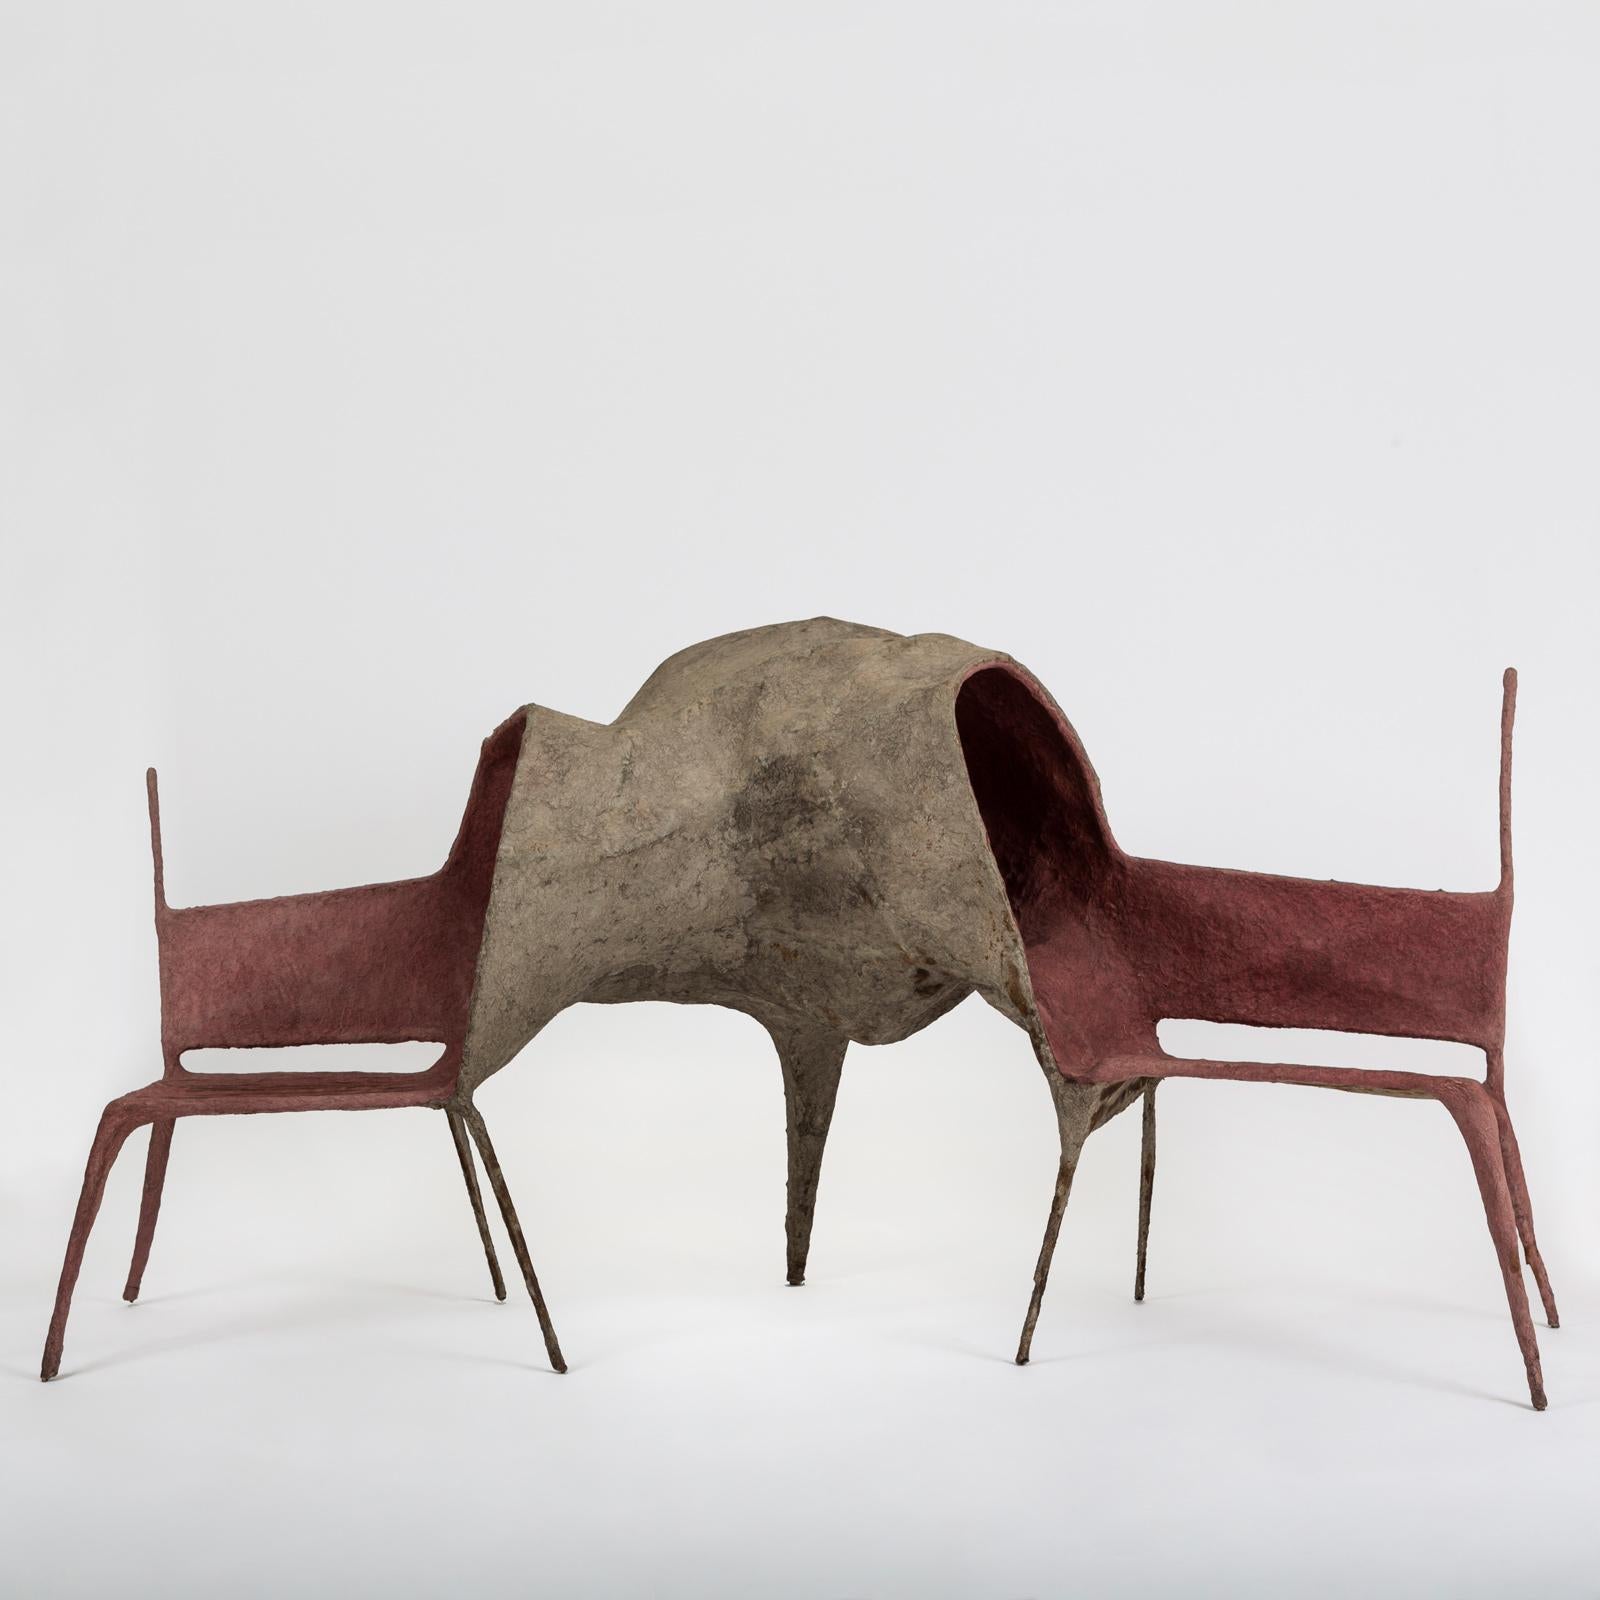 The Lovers’ chair is part of the ‘Evolution Collection’. Living in an era were we are saturated of information at a frenetic rhythm, Nacho Carbonell wanted to create a refuge were one can escape and digest this rave in which we are submerged. This